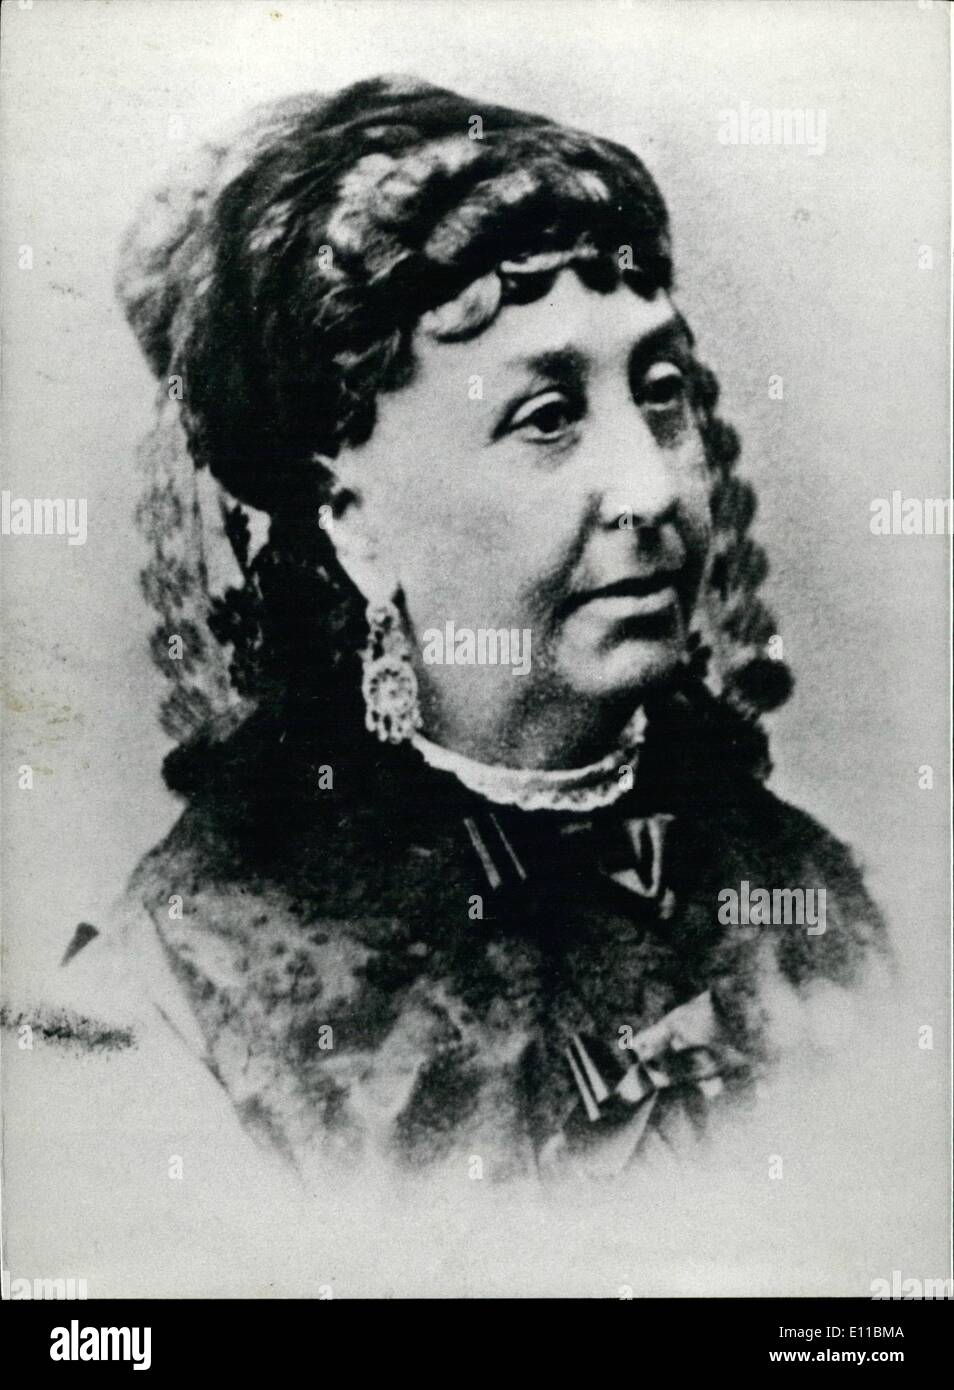 Aug. 08, 1976 - 100TH ANNIVERSARY OF THE DEATH OF GEORGE SAND Hundred years ago, on June 8th 1876, Amandine Aurore Lucie Baronne de Dudevant, who called herself GEORGE SAND (picture), died on Chateau Nohant in France. Over a century ago, George Sand already fought for equal rights for women, turned against bourgeois standards of morality in her novels and demanded the right of free love for women. George Sand herself, after having been divorced of Baron de Dudevant, lived with poet Alfred de Musset and later with composer Frederic Chopin Stock Photo